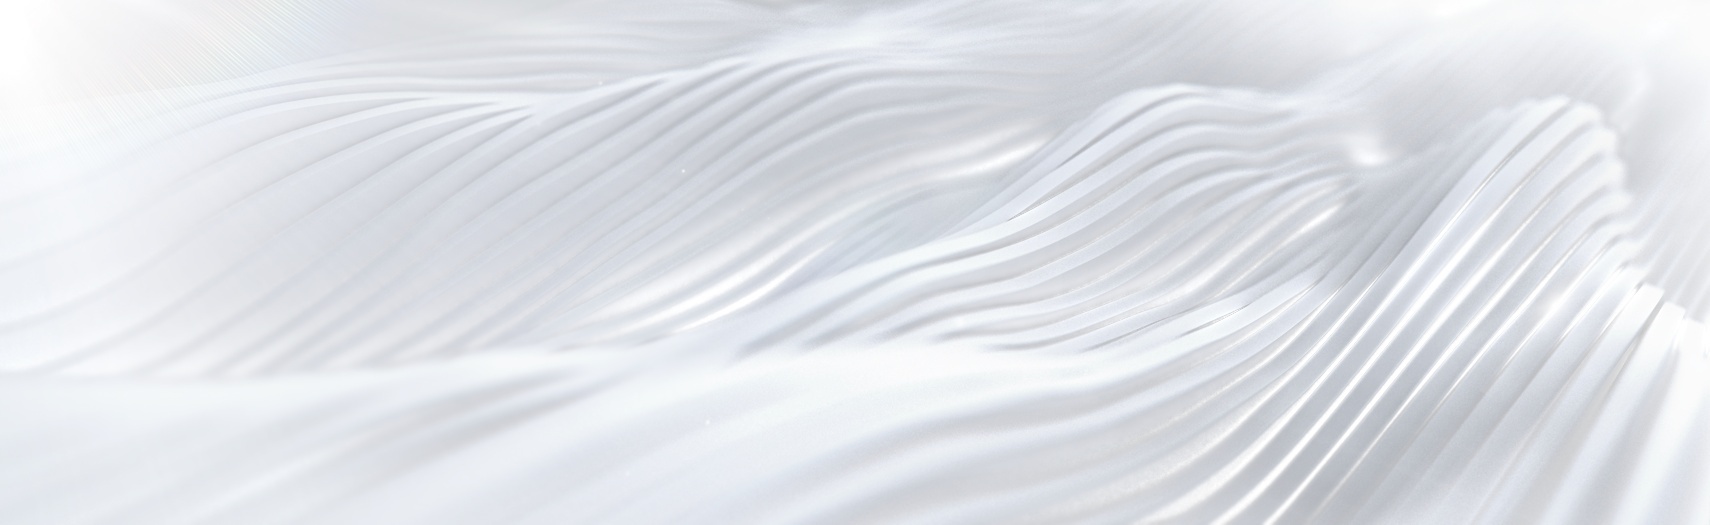 Render of smooth, layered waves of white shapes